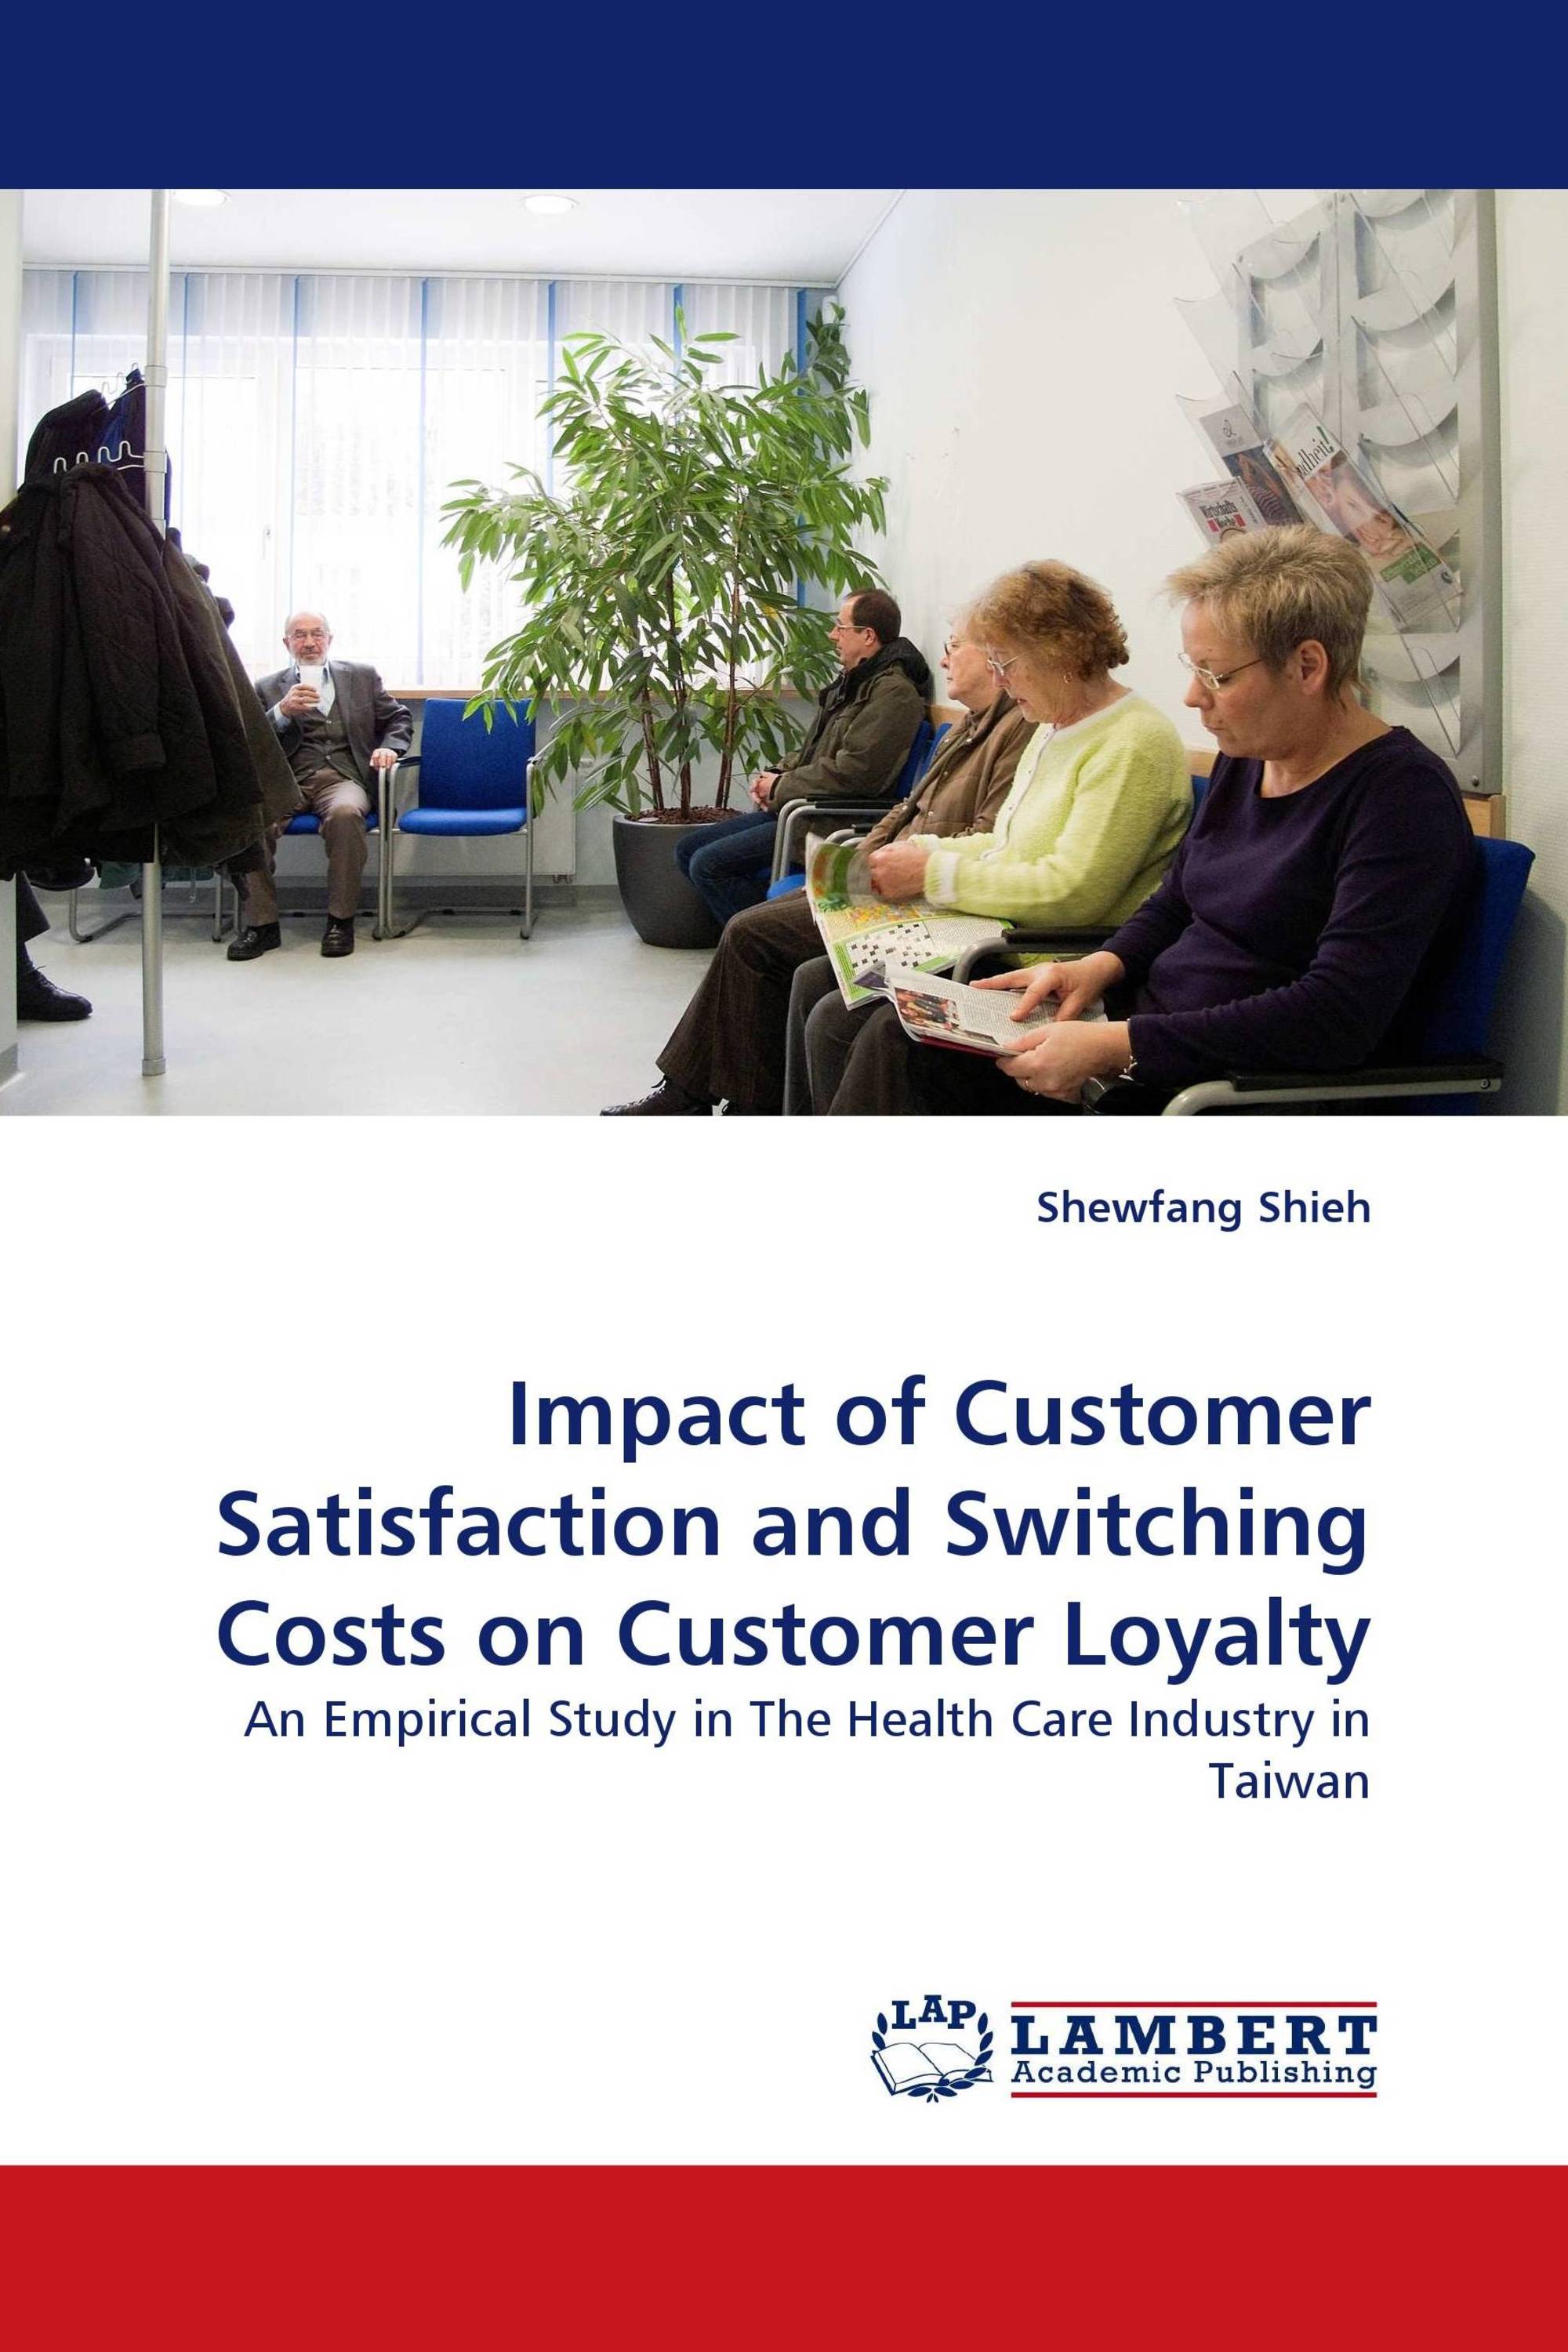 Impact of Customer Satisfaction and Switching Costs on Customer Loyalty